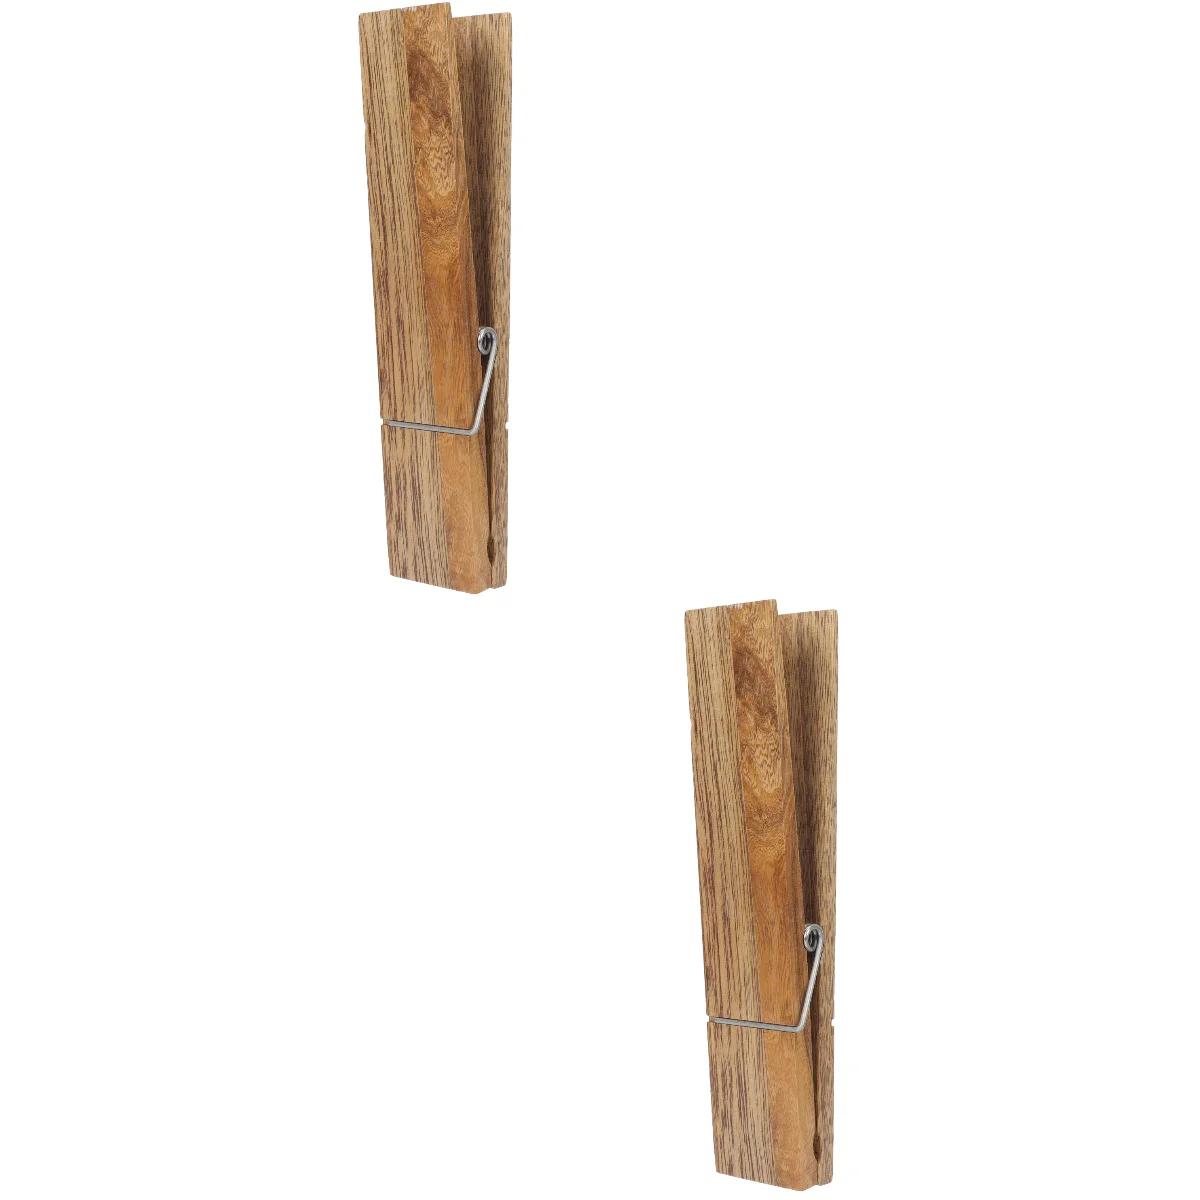 

Towel Wooden Clip Clothes Wall Clips Clothespin Clothespins Wood Rack Hook Laundry Large Decorative Racks Bar Rustic Clamp Home